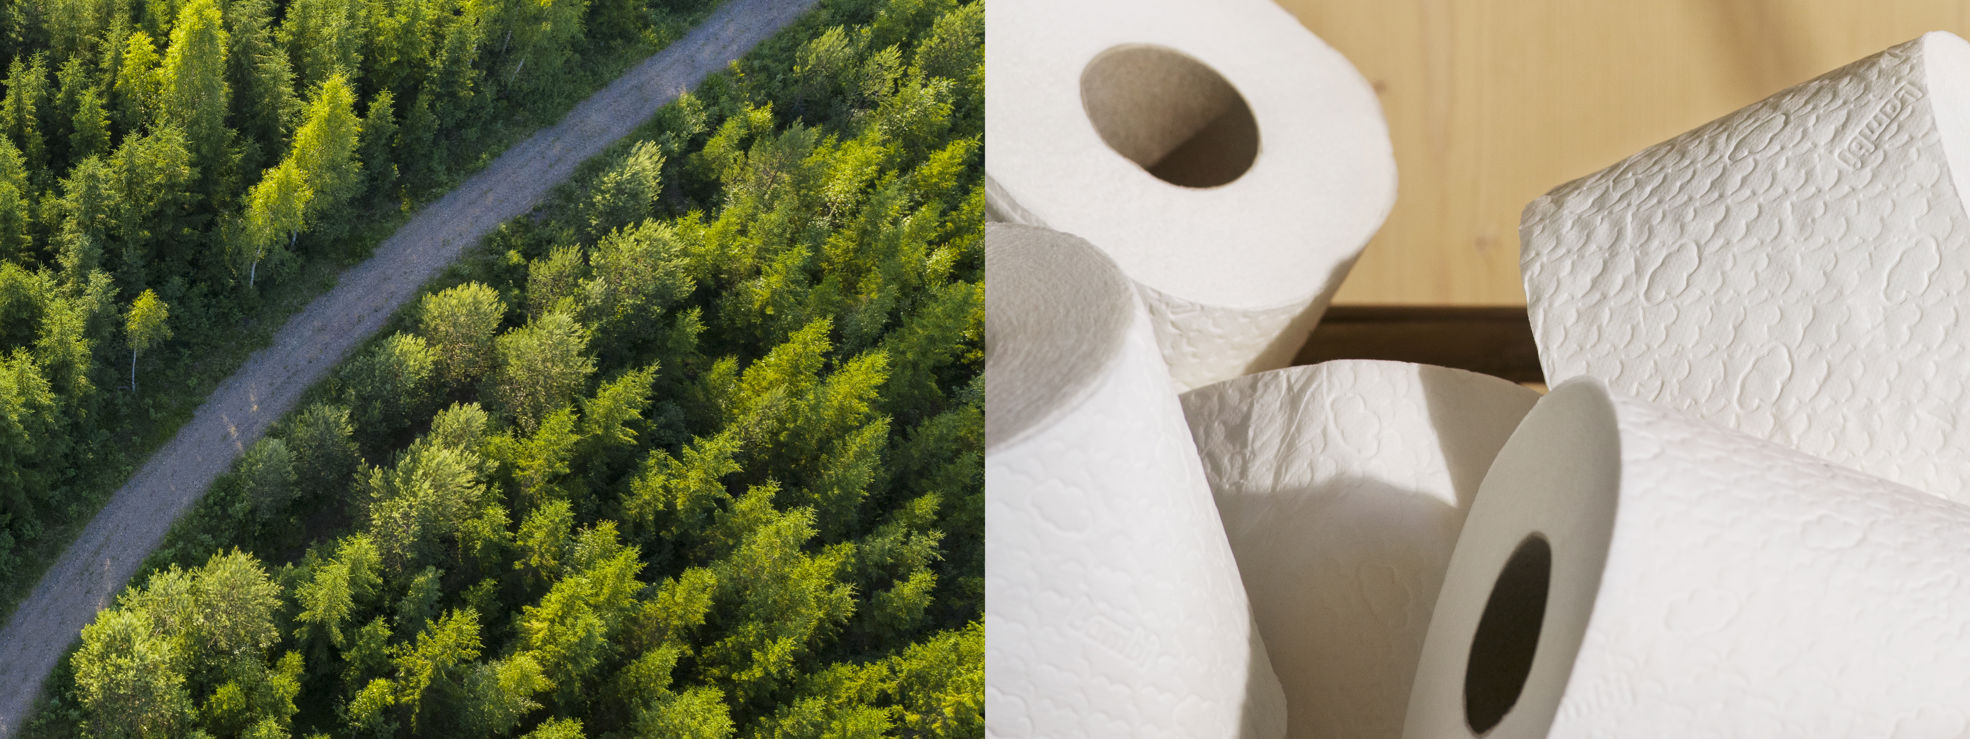 Toilet paper rolls and forest